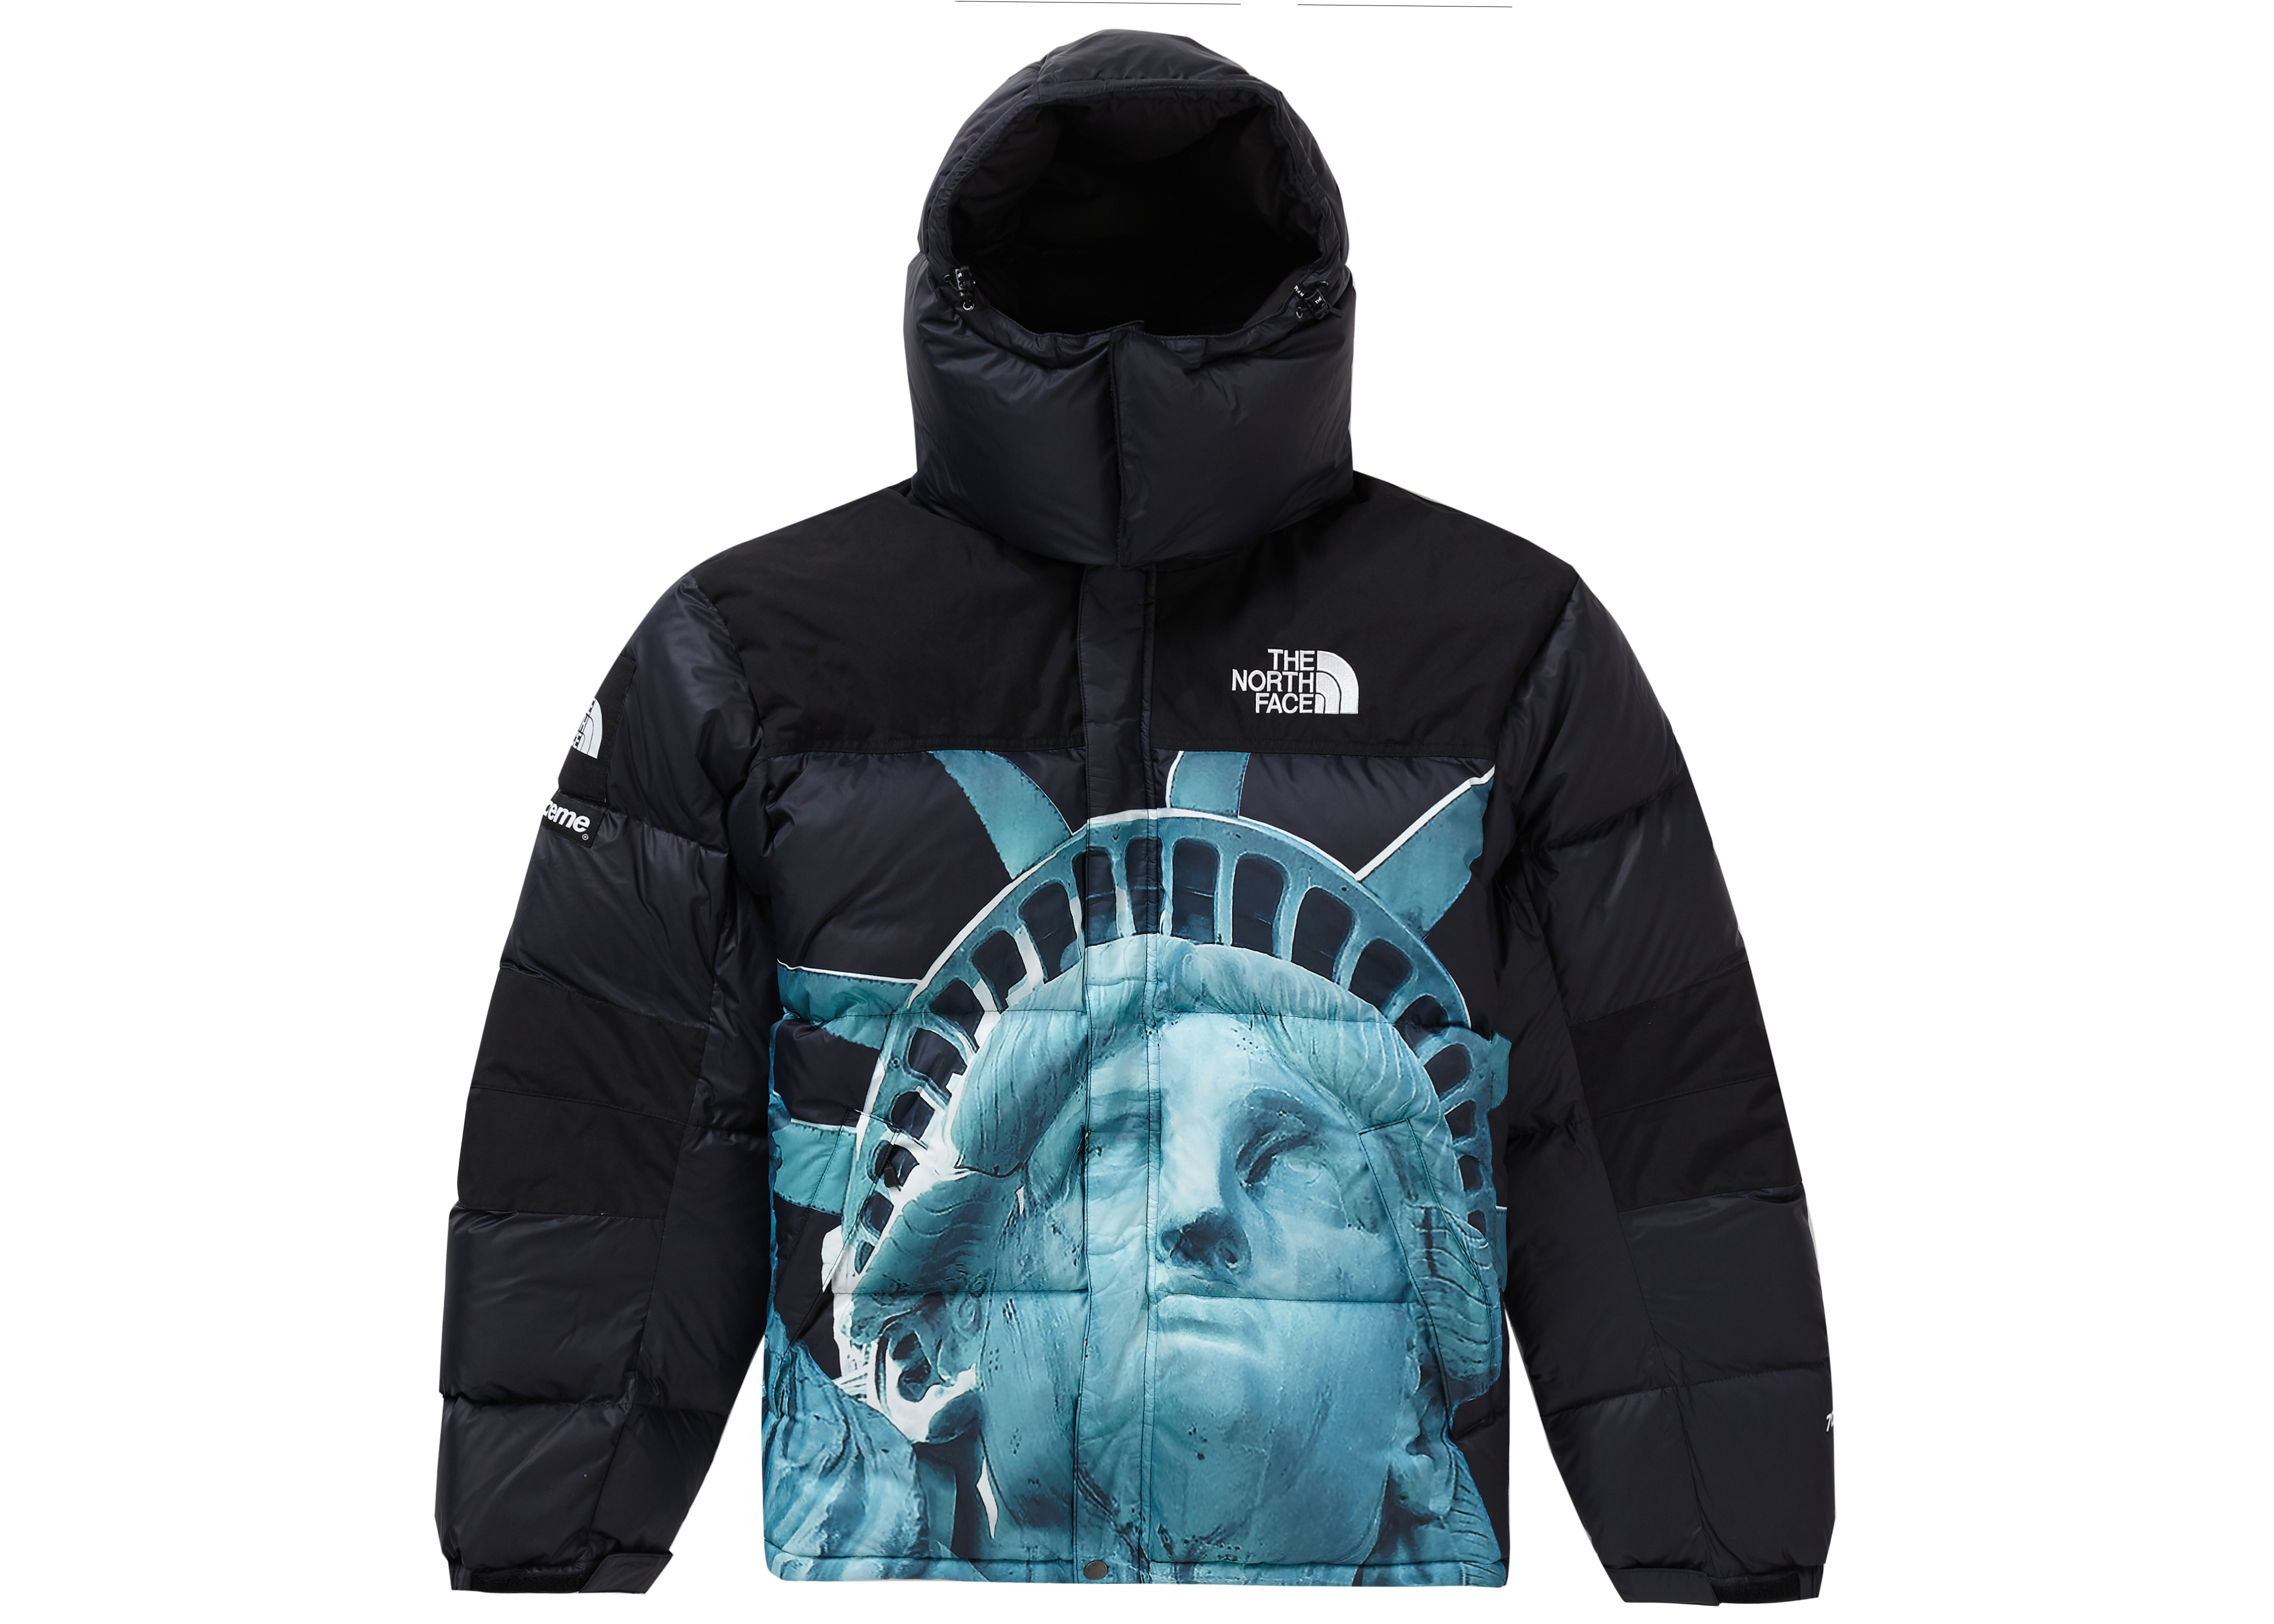 The North Face Supreme Jacket Top Sellers, SAVE 59% - fearthemecca.com